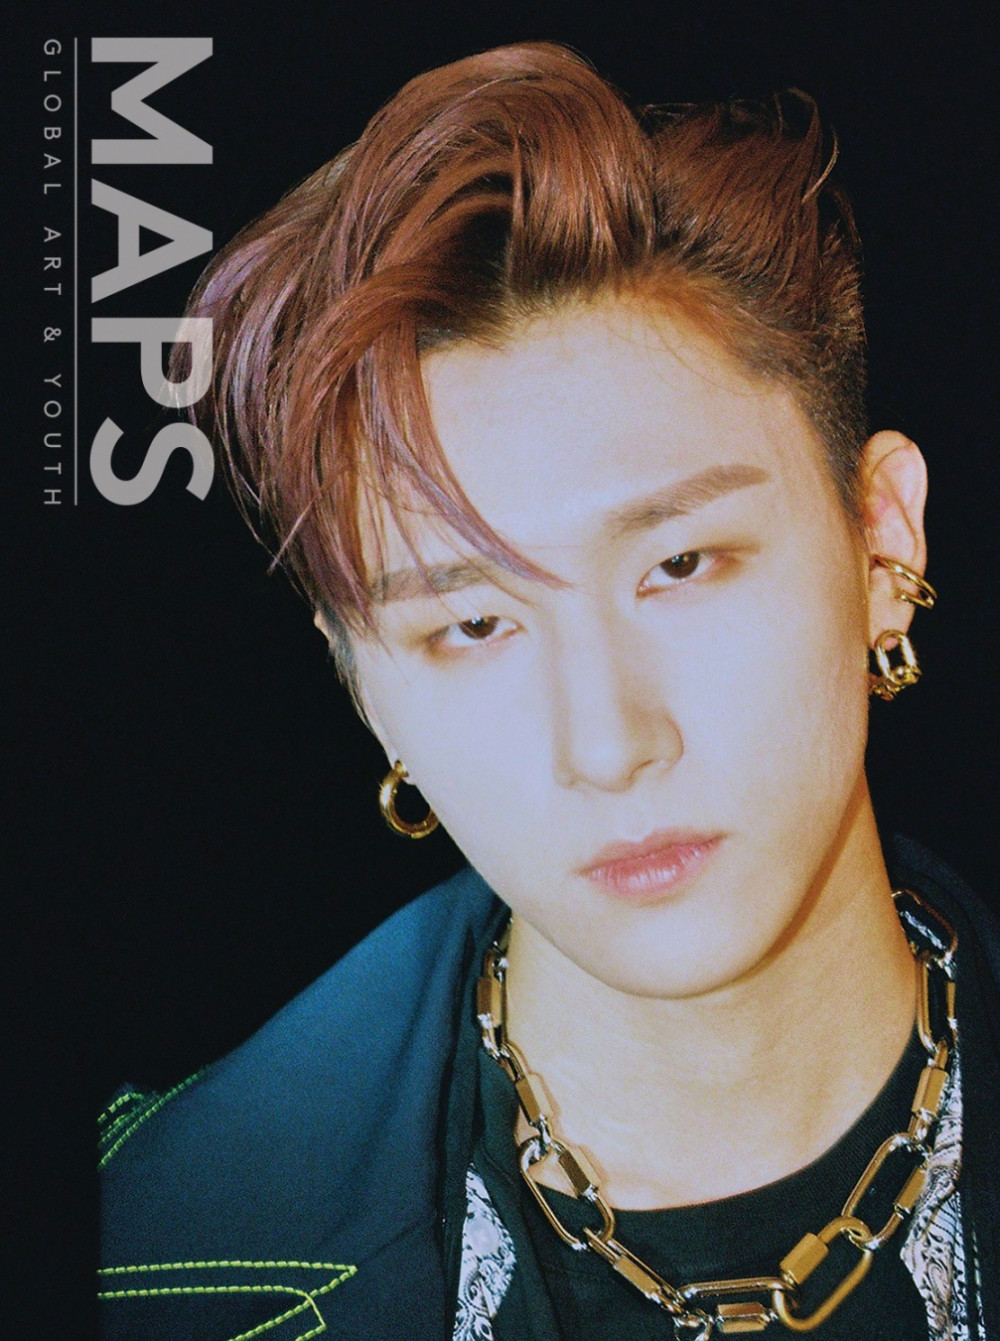 monsta-x-i-m-reveals-his-first-ever-solo-photoshoot-maps-5